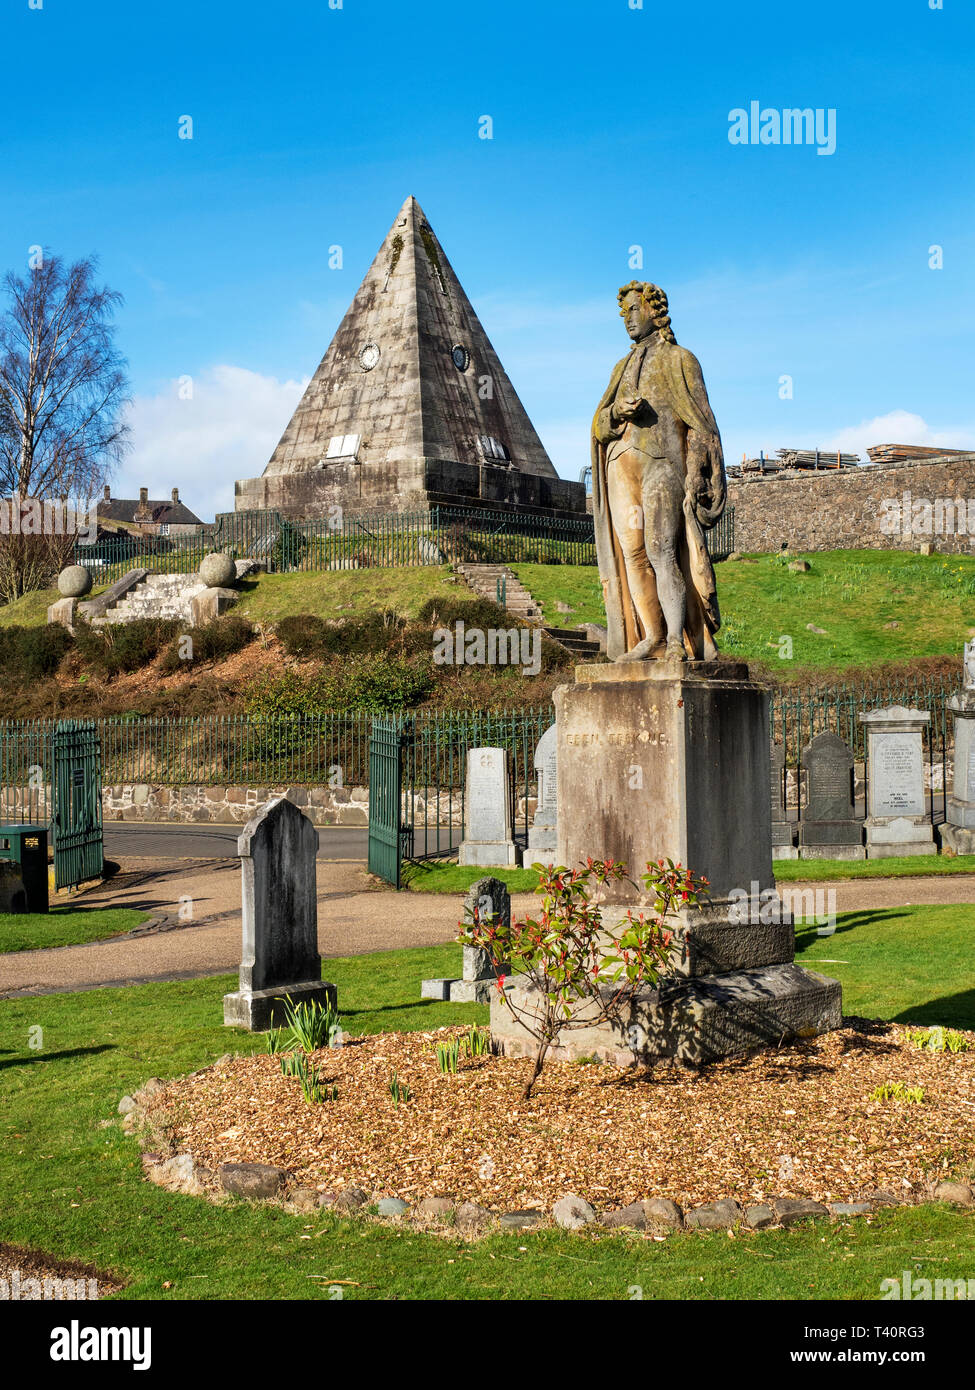 Ebenezer Erskine statue and the Star Pyramid in the Old Town Cemetery City of Stirling Scotland Stock Photo